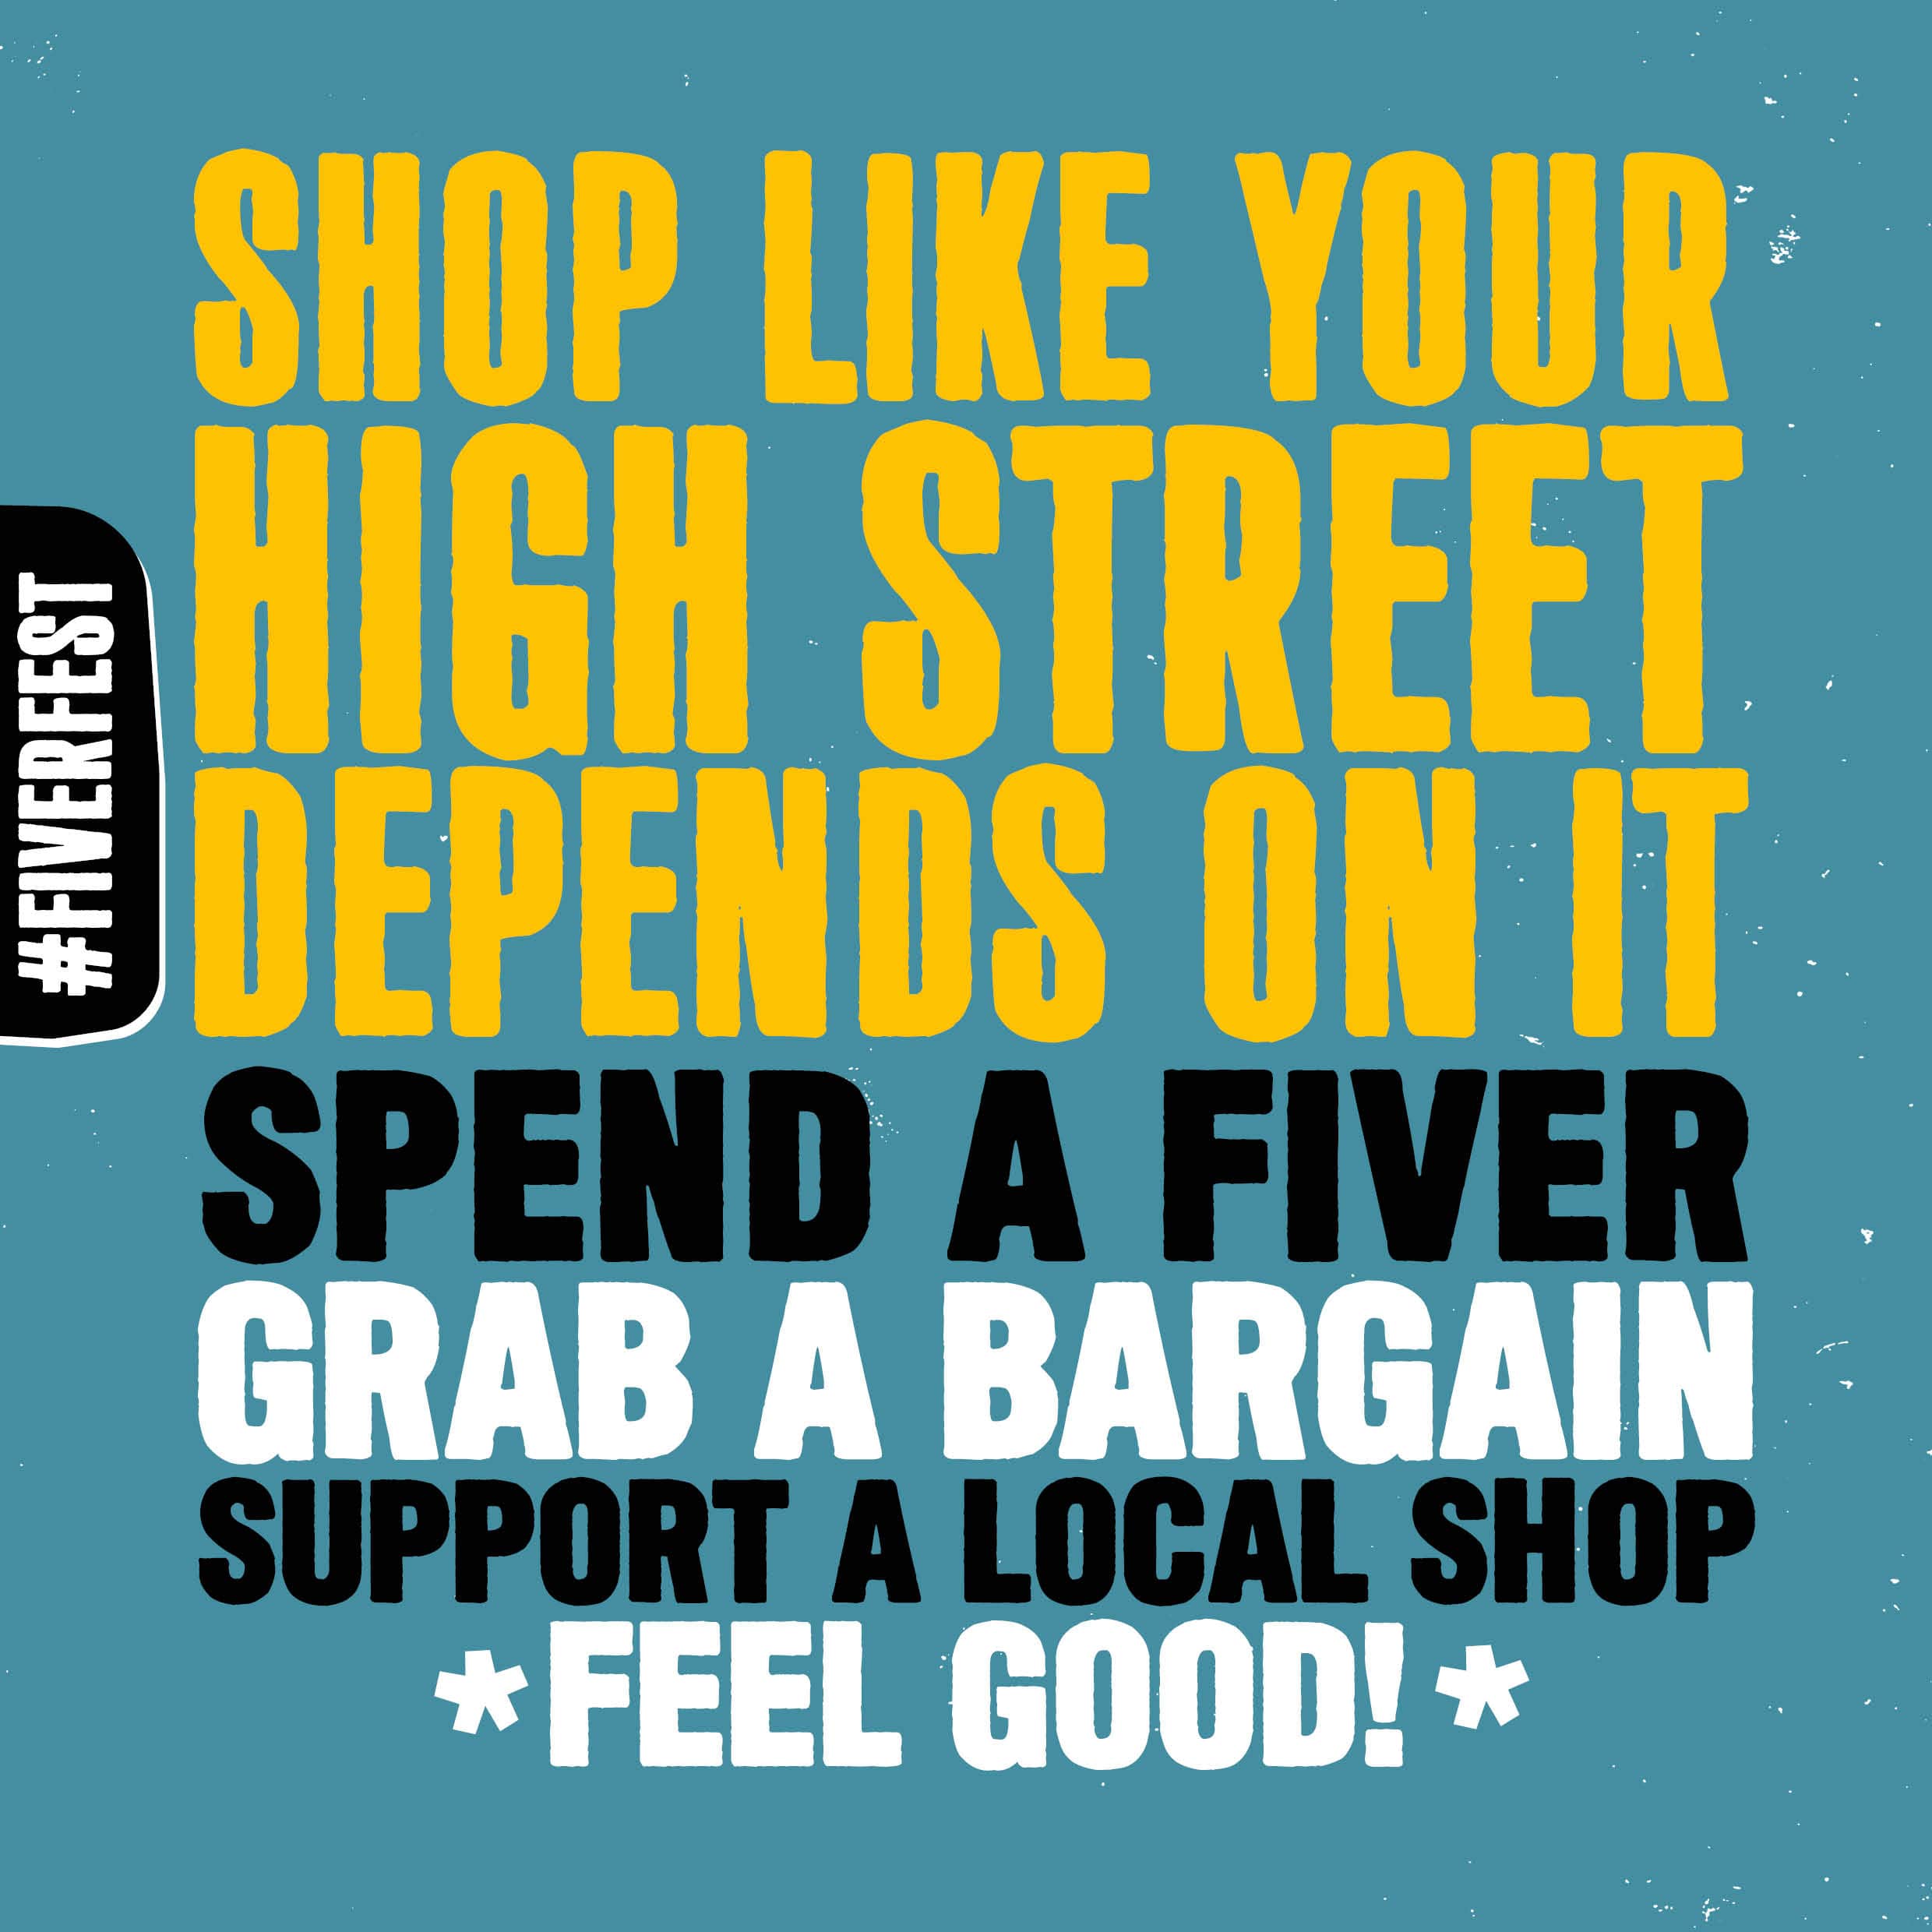 Shop like your high street depends on it lettering